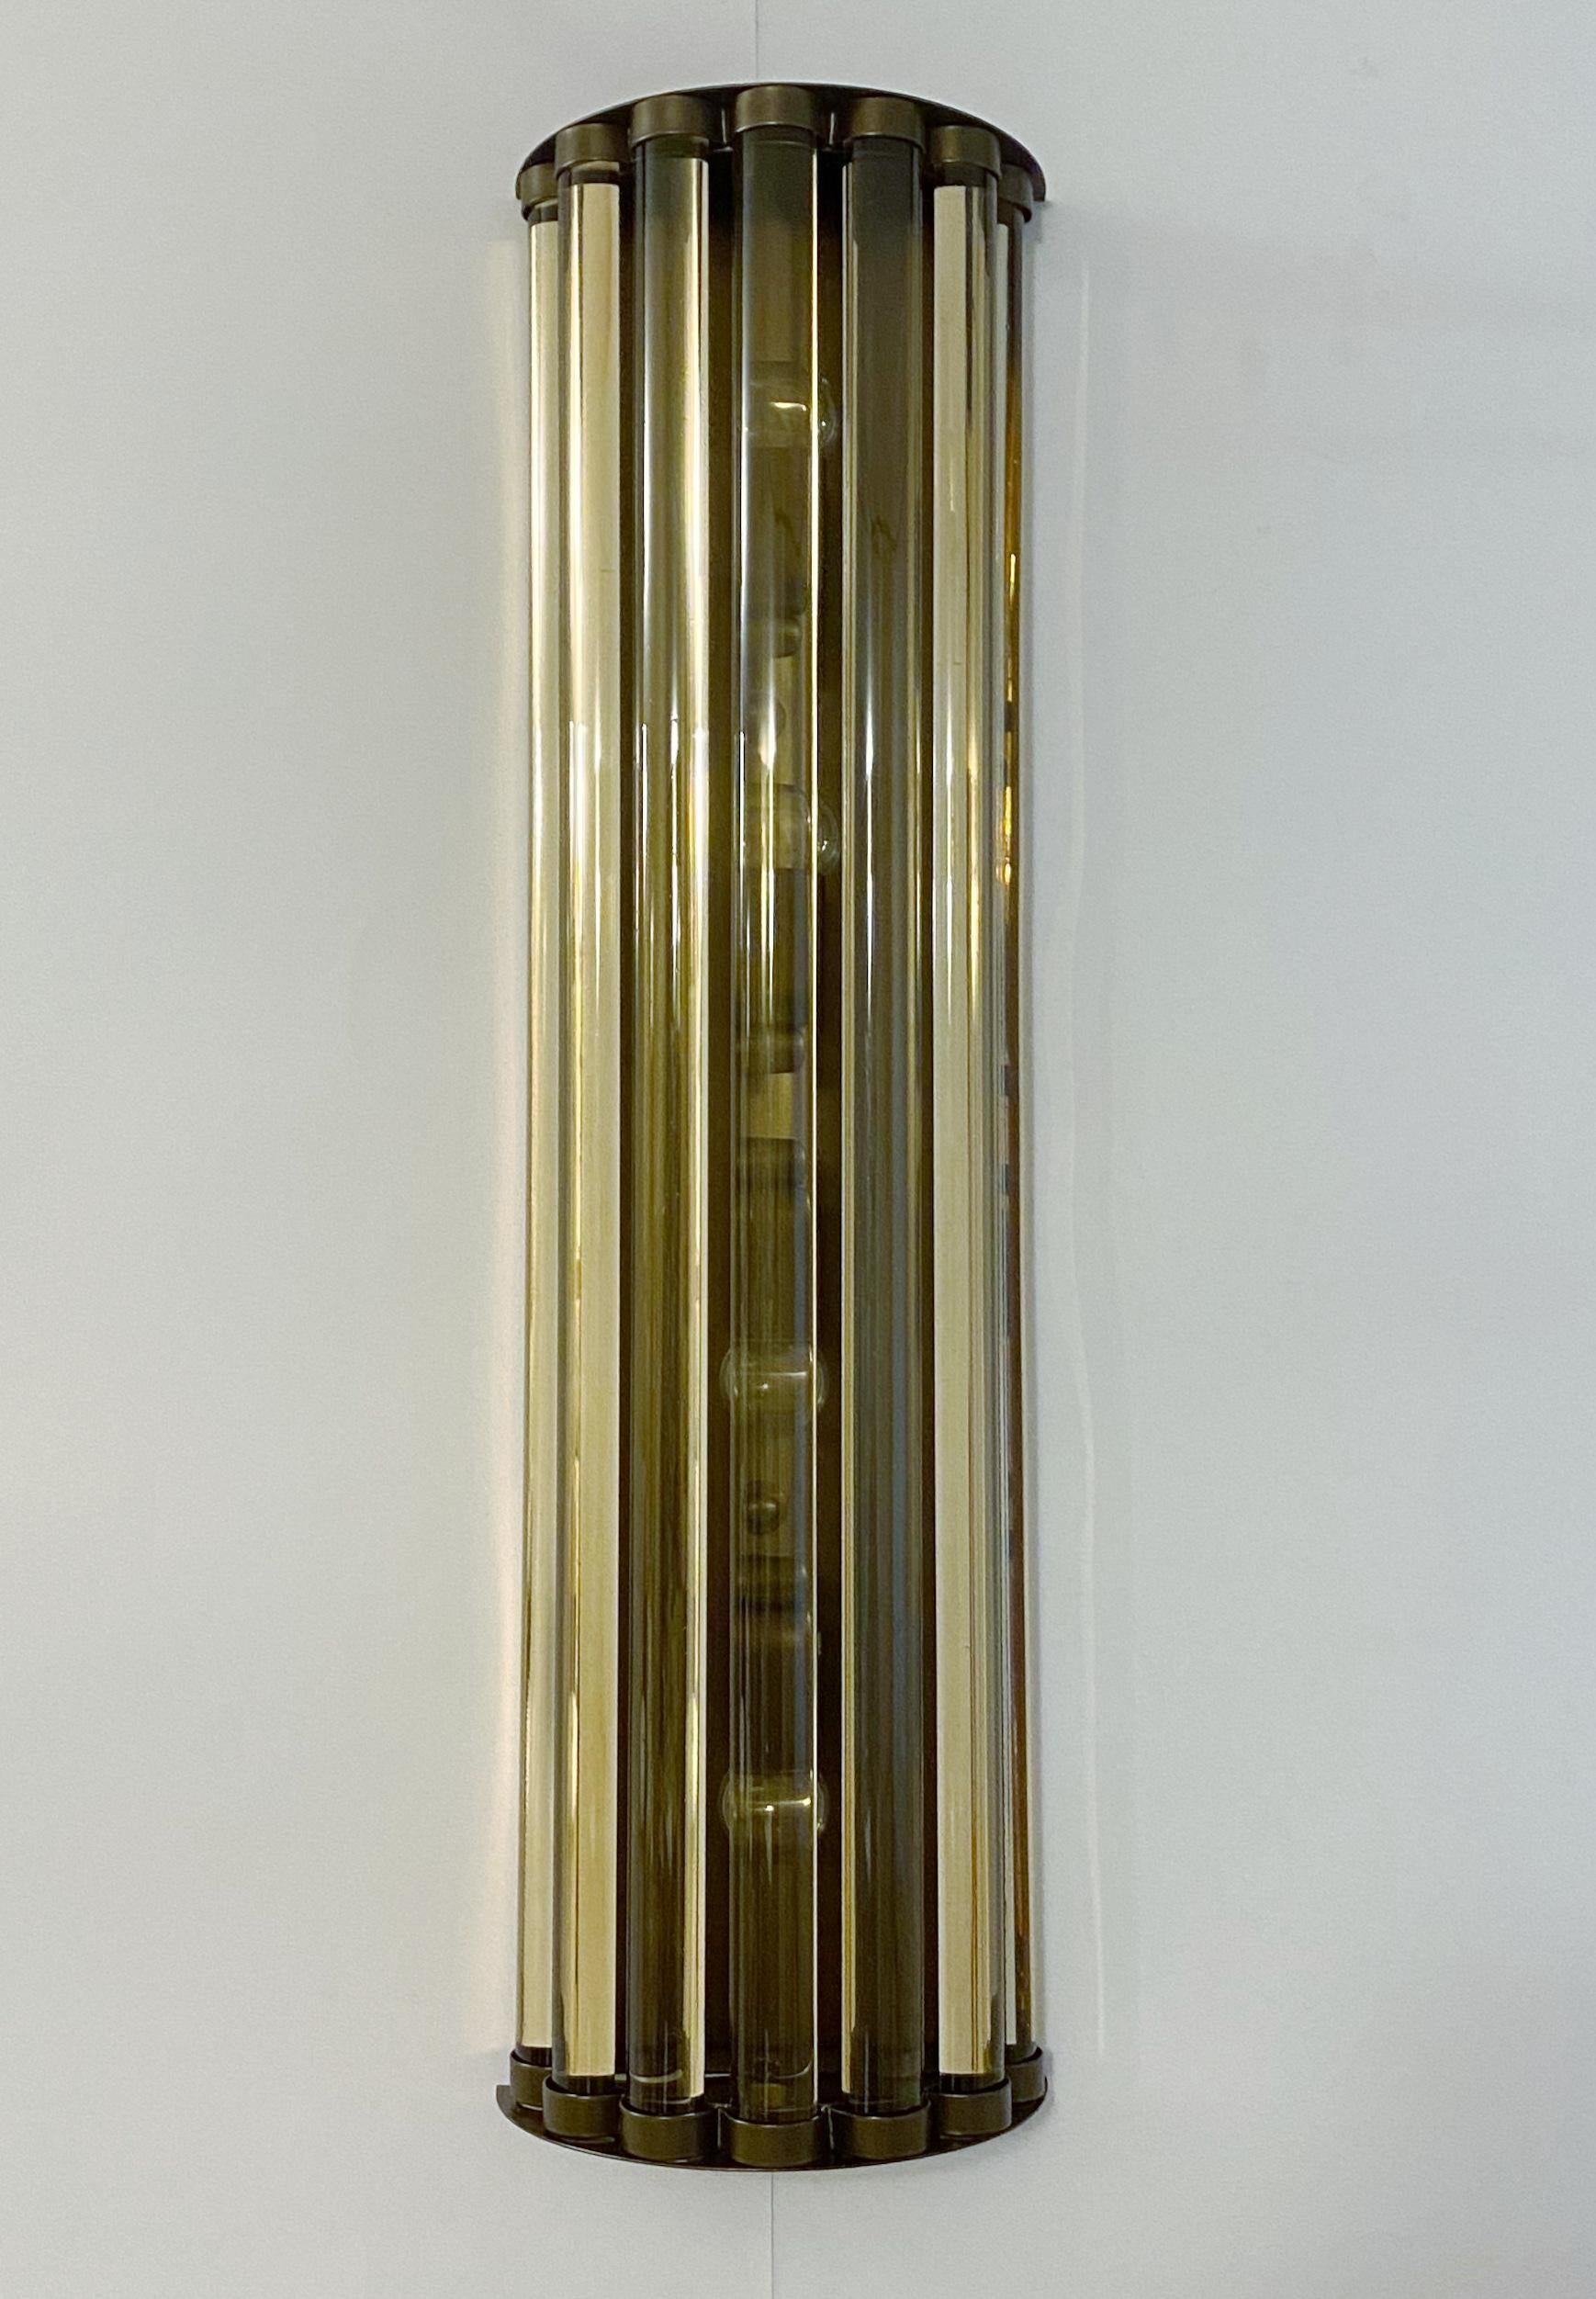 Italian wall light or flush mount with smoky colored long crystal bars mounted on bronzed metal finish / Designed by Fabio Bergomi for Fabio Ltd / Made in Italy
4 lights / E12 or E14 type / max 40W each
Measures: Height 28 inches / Width 8 inches /